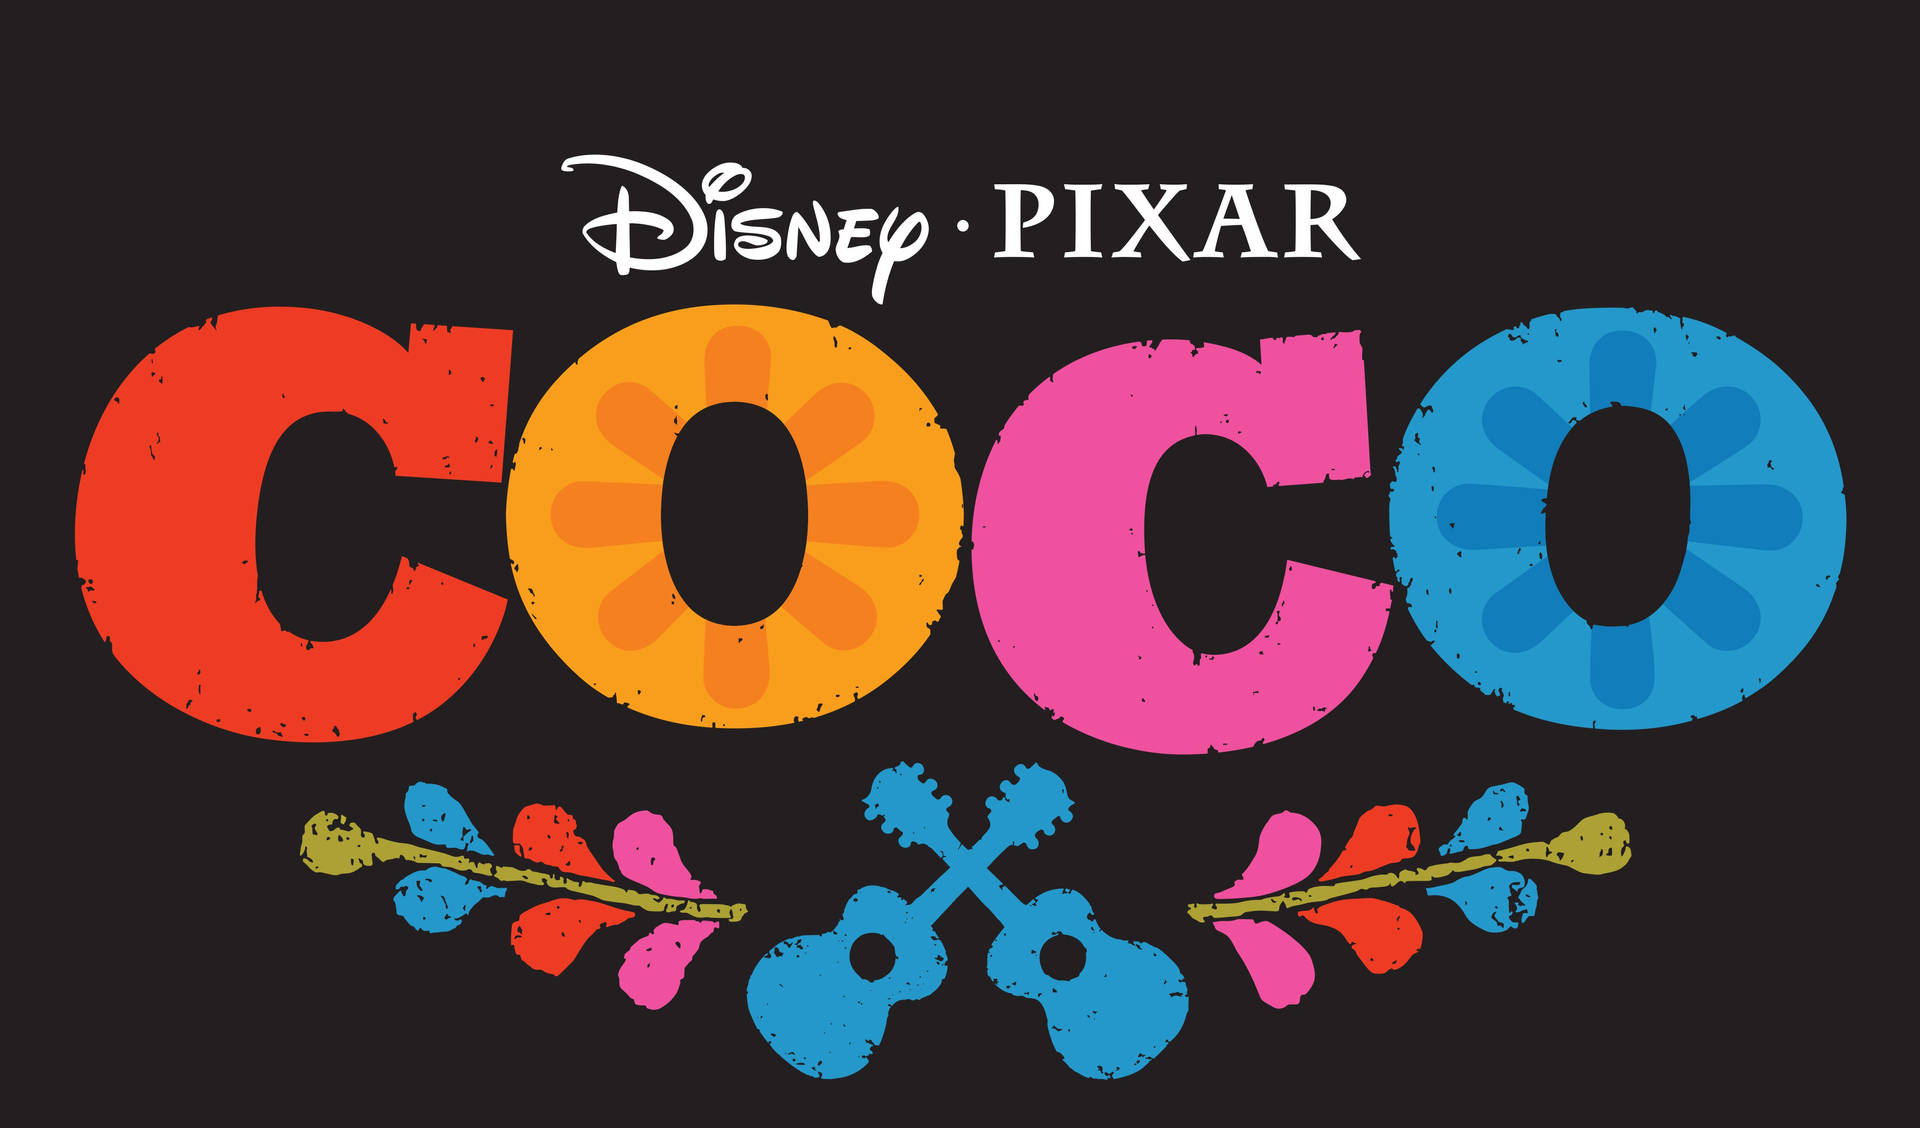 Coco Movie Title In Black Background